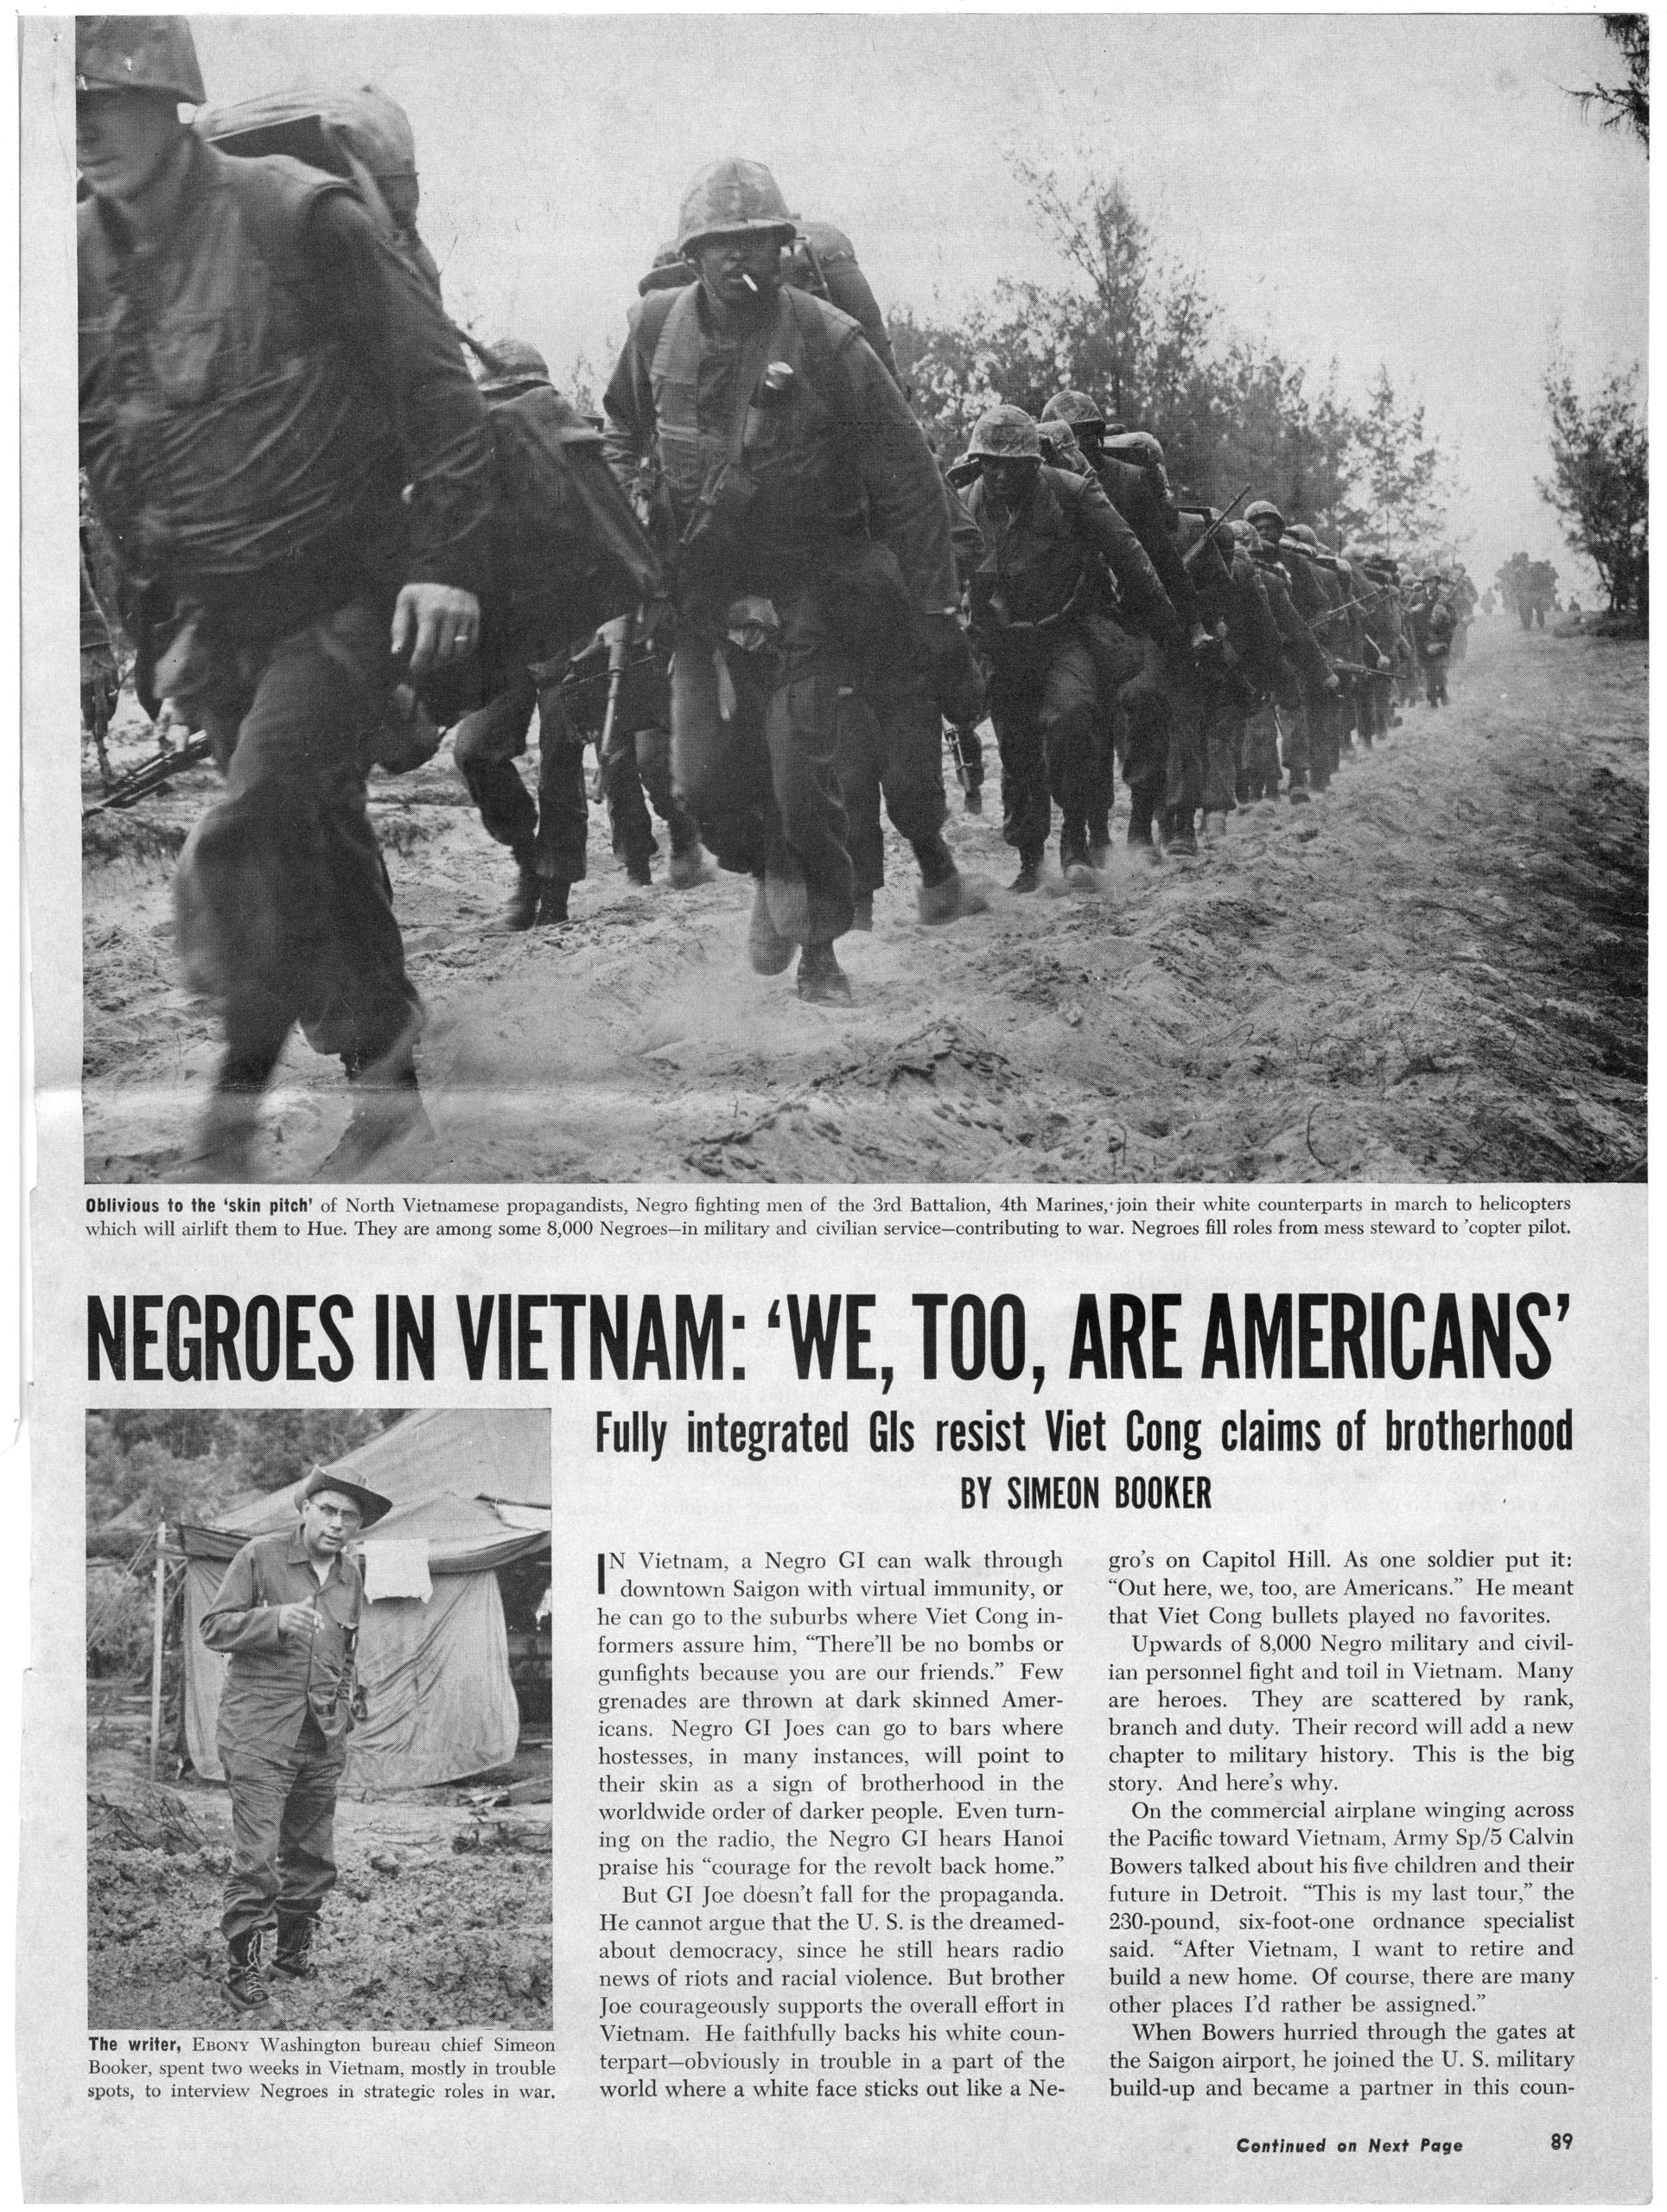 "Negros in Vietnam: We, Too, Are Americans", George Alexander Sewell; Simeon Booker, 1965 November, George A. Sewell papers